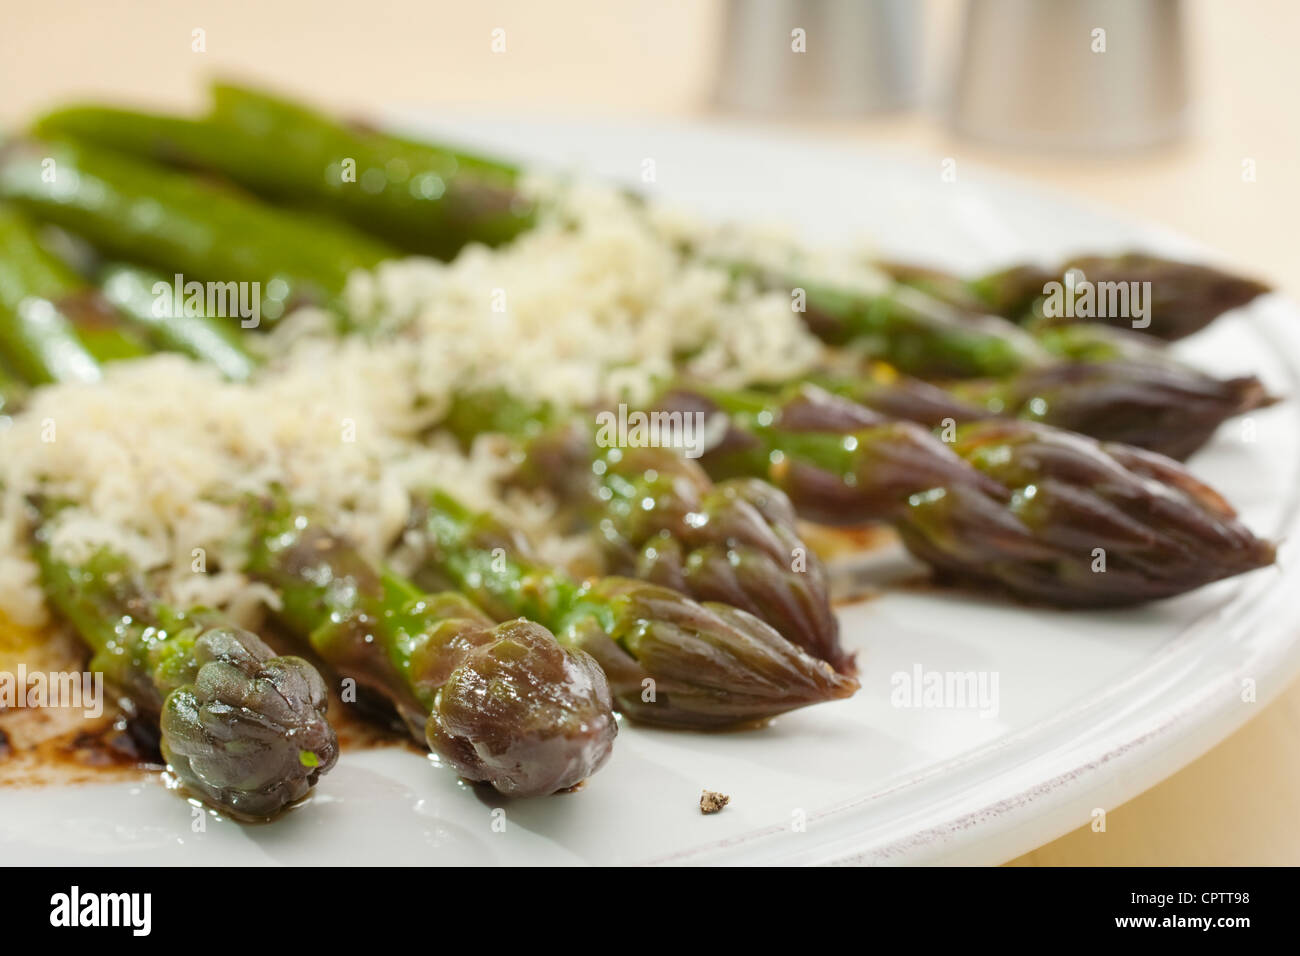 A really delicious combination, fresh steamed asparagus with parmesan and balsamic vinaigrette. Stock Photo